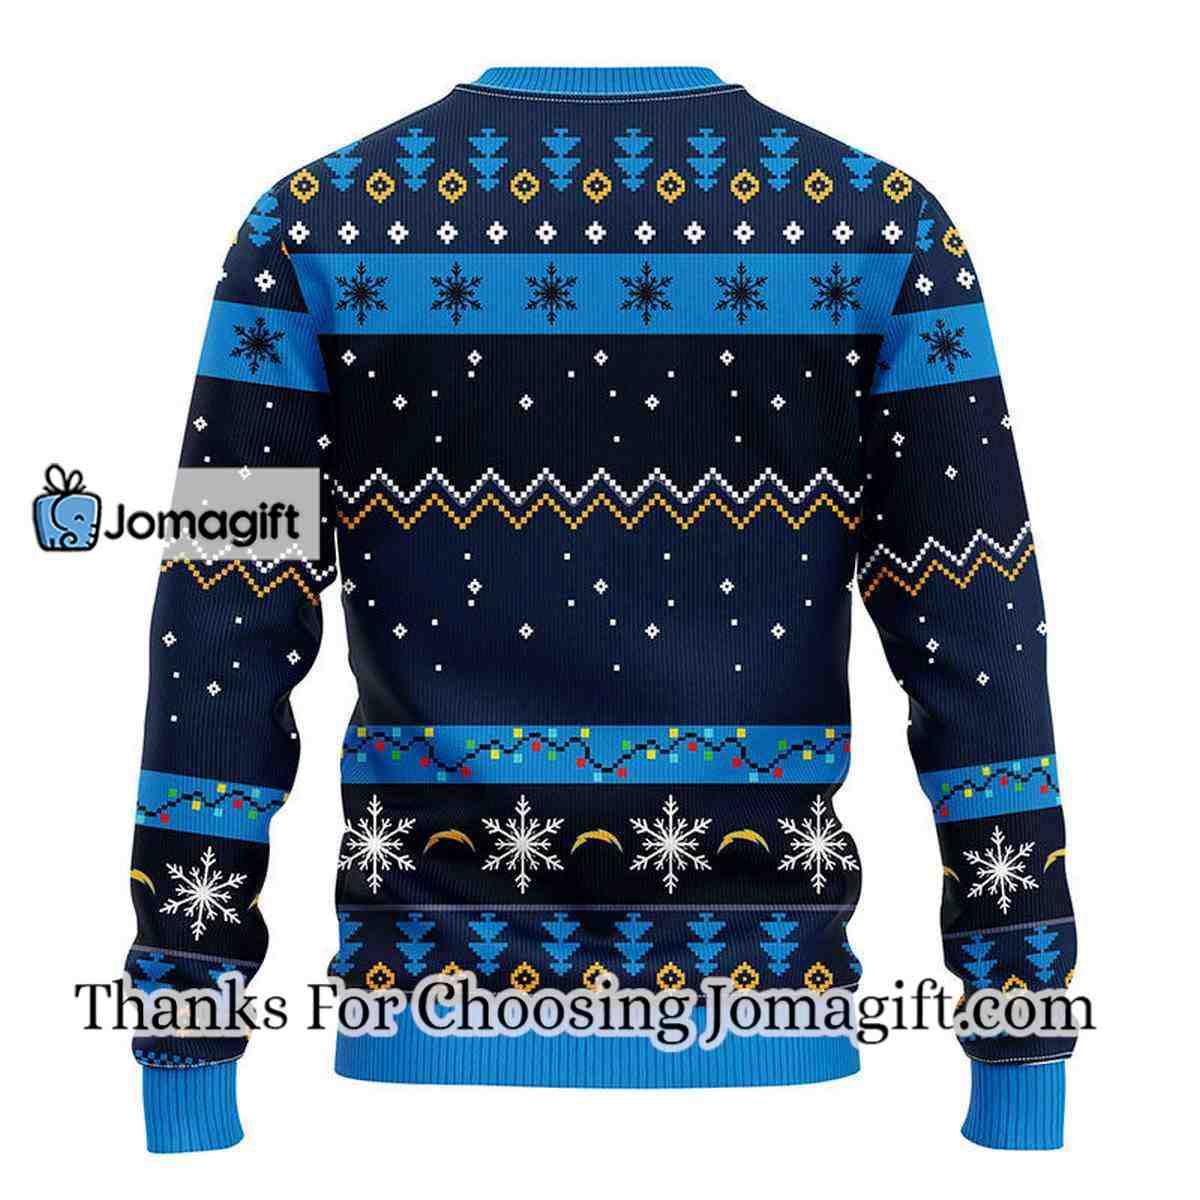 San Diego Chargers Dabbing Santa Claus Christmas Ugly Sweater 2 1